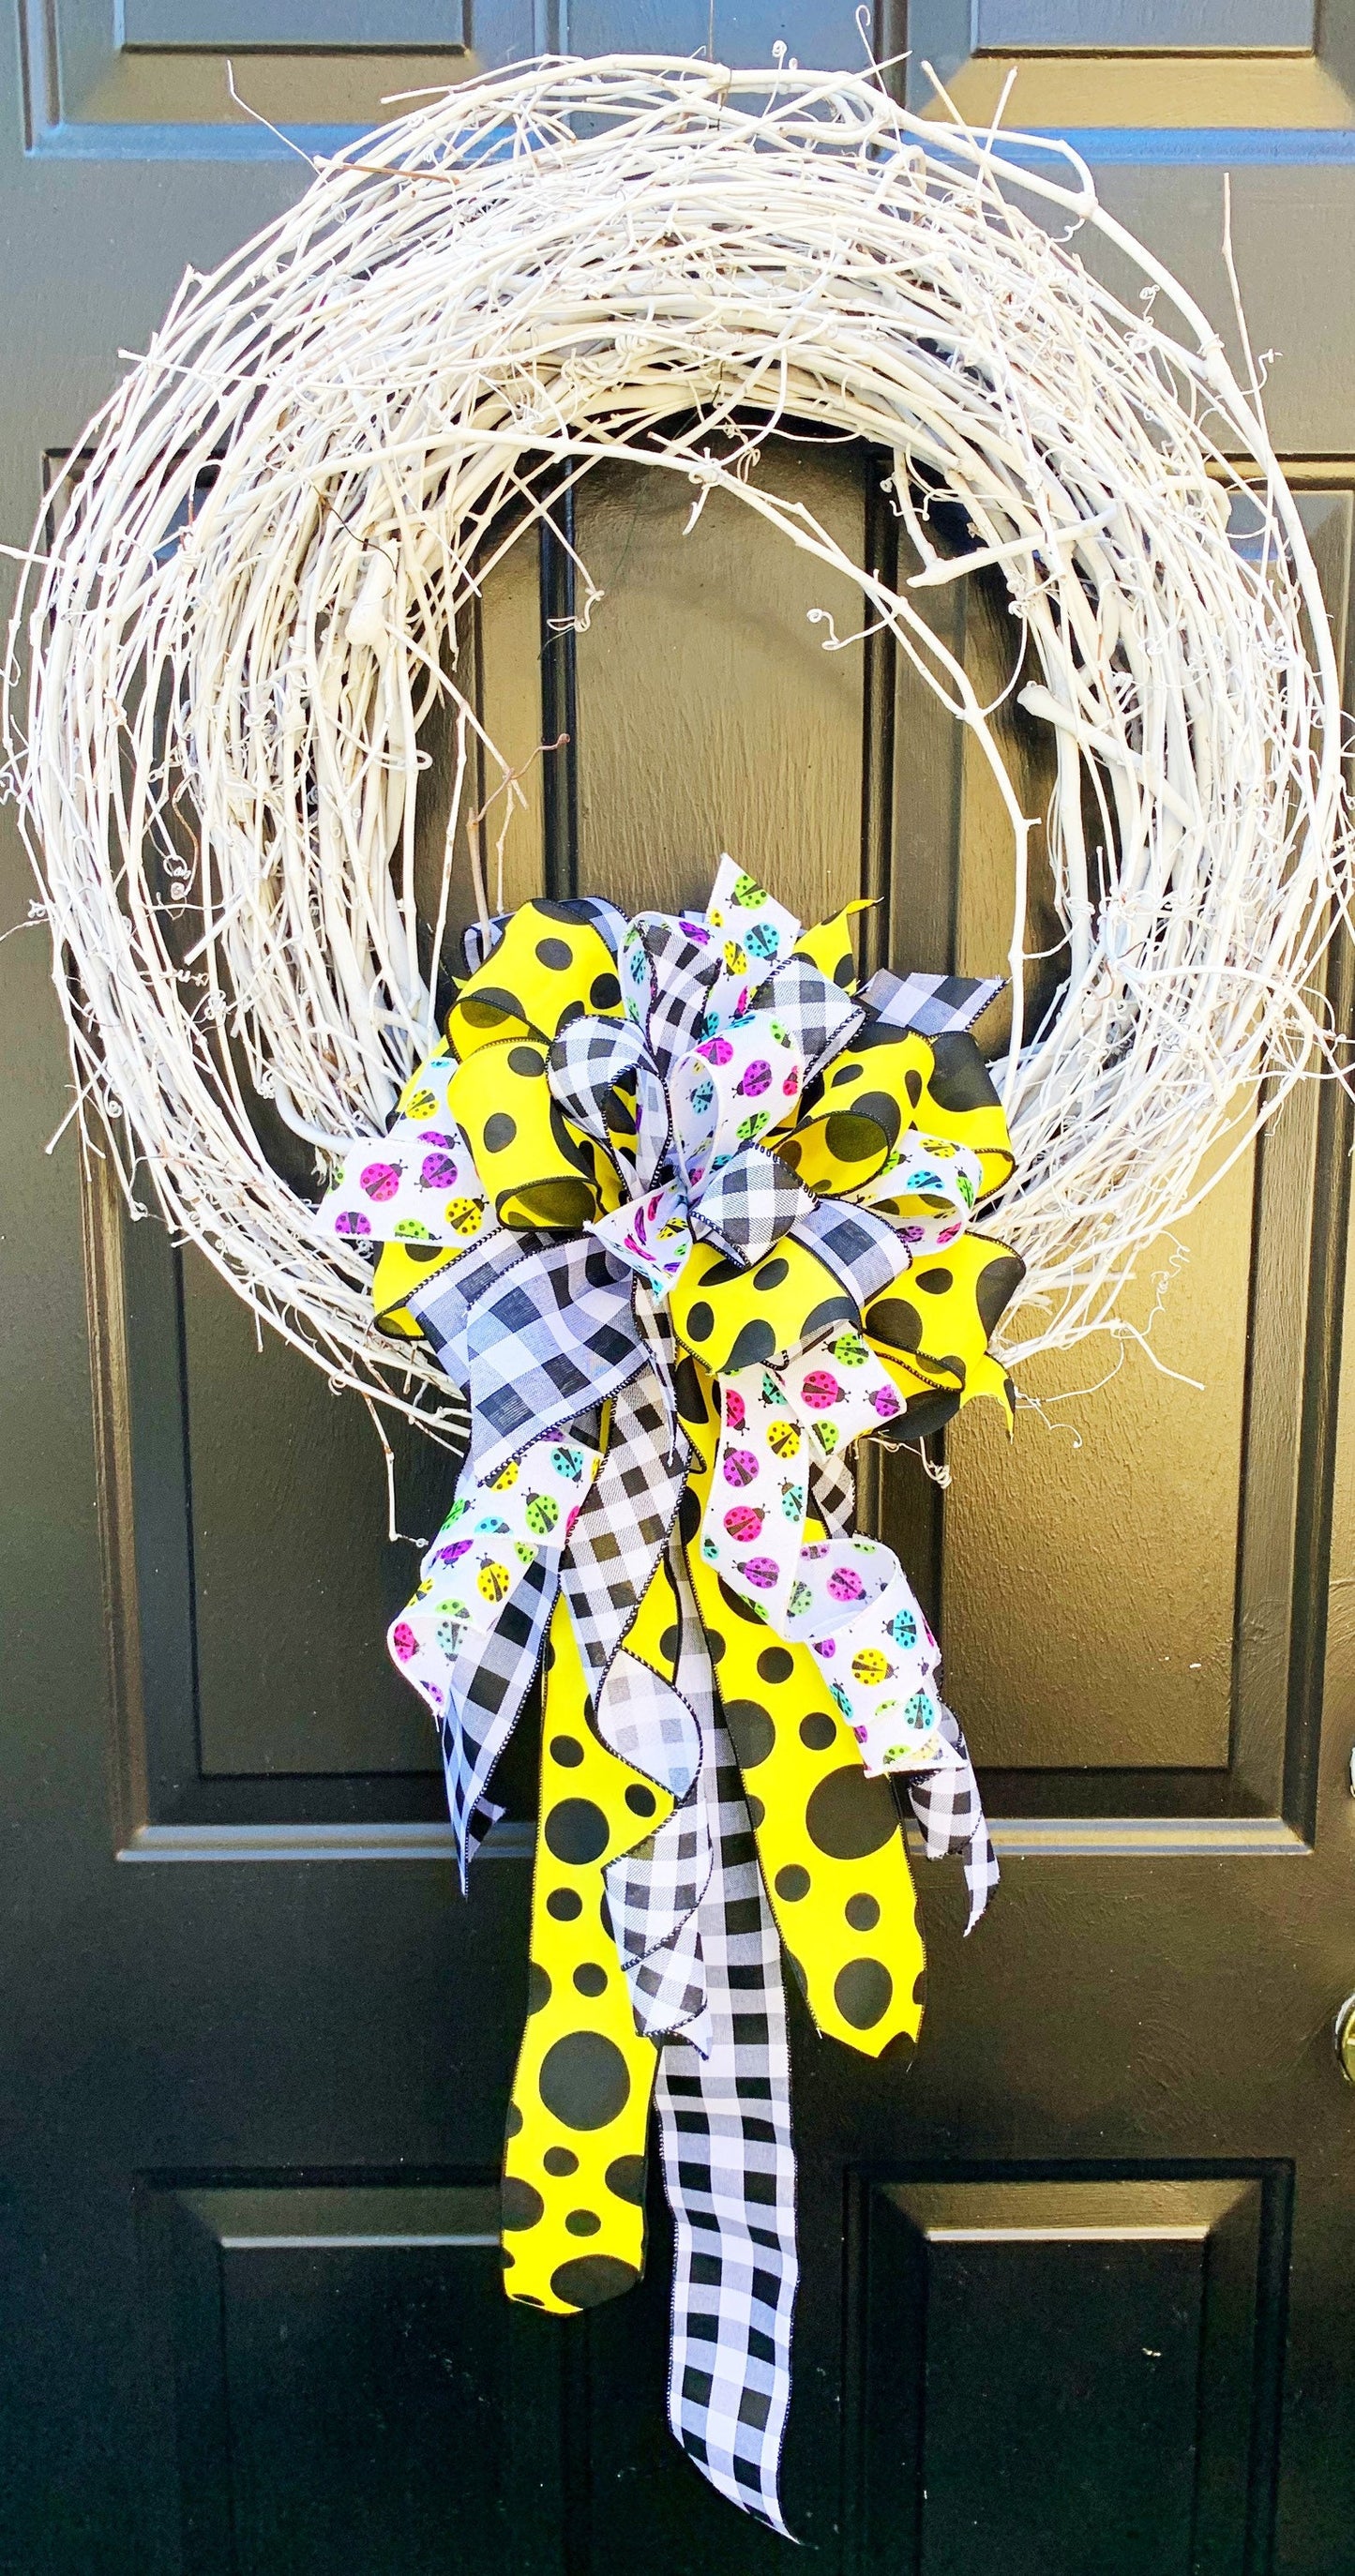 Everyday Collection - Lady Bug Bow,Lady Bugs,Lady Bugs Bow,Summer Bow,Wreath Bow,Mailbox Bow,Large Bow,Bow,Bows,Gift Bow,Gift Basket Bow